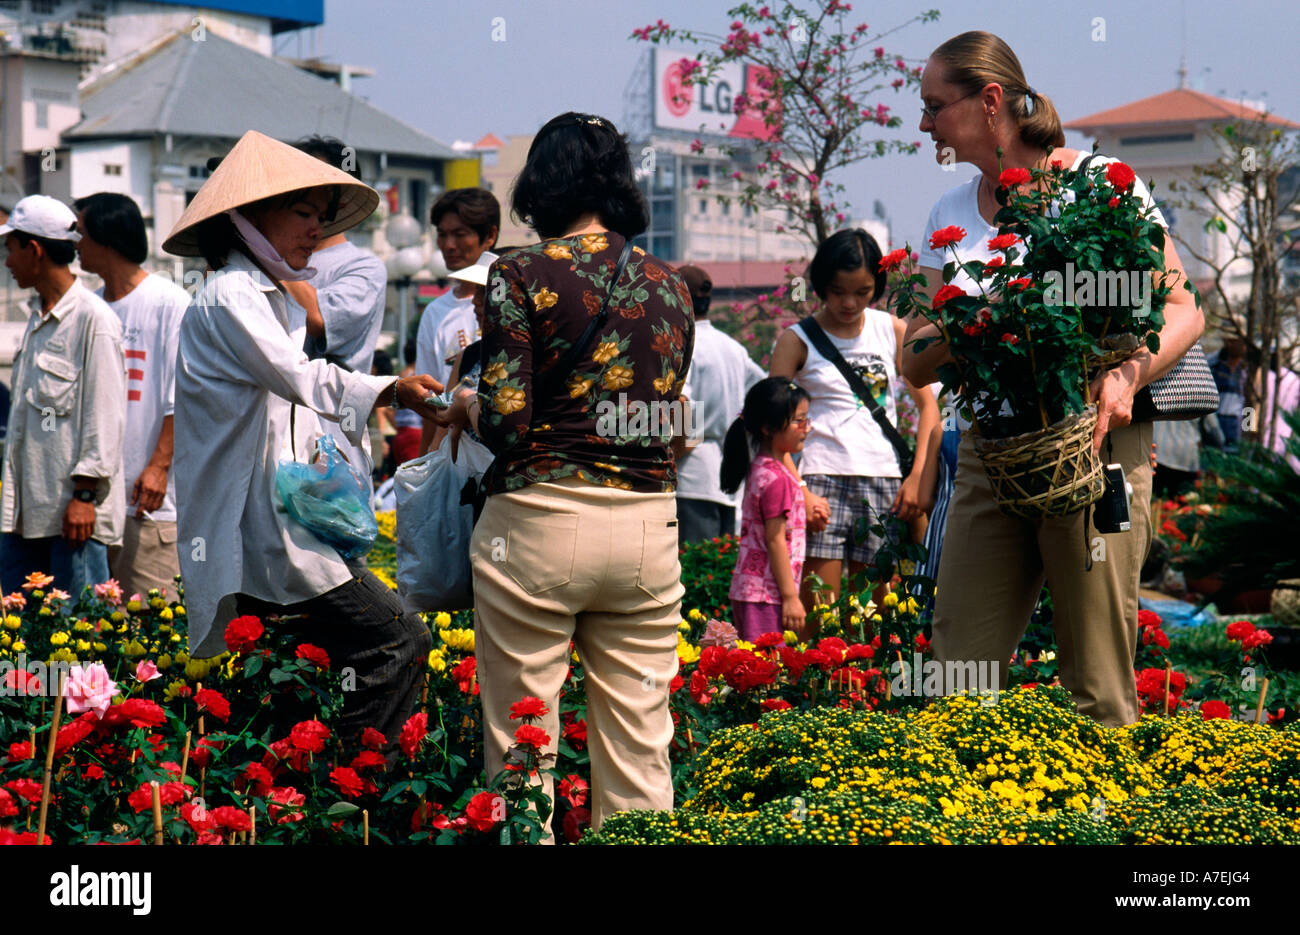 Feb 1, 2003 - Tourist buying flower pot at the flower market near the town hall in Saigon Stock Photo